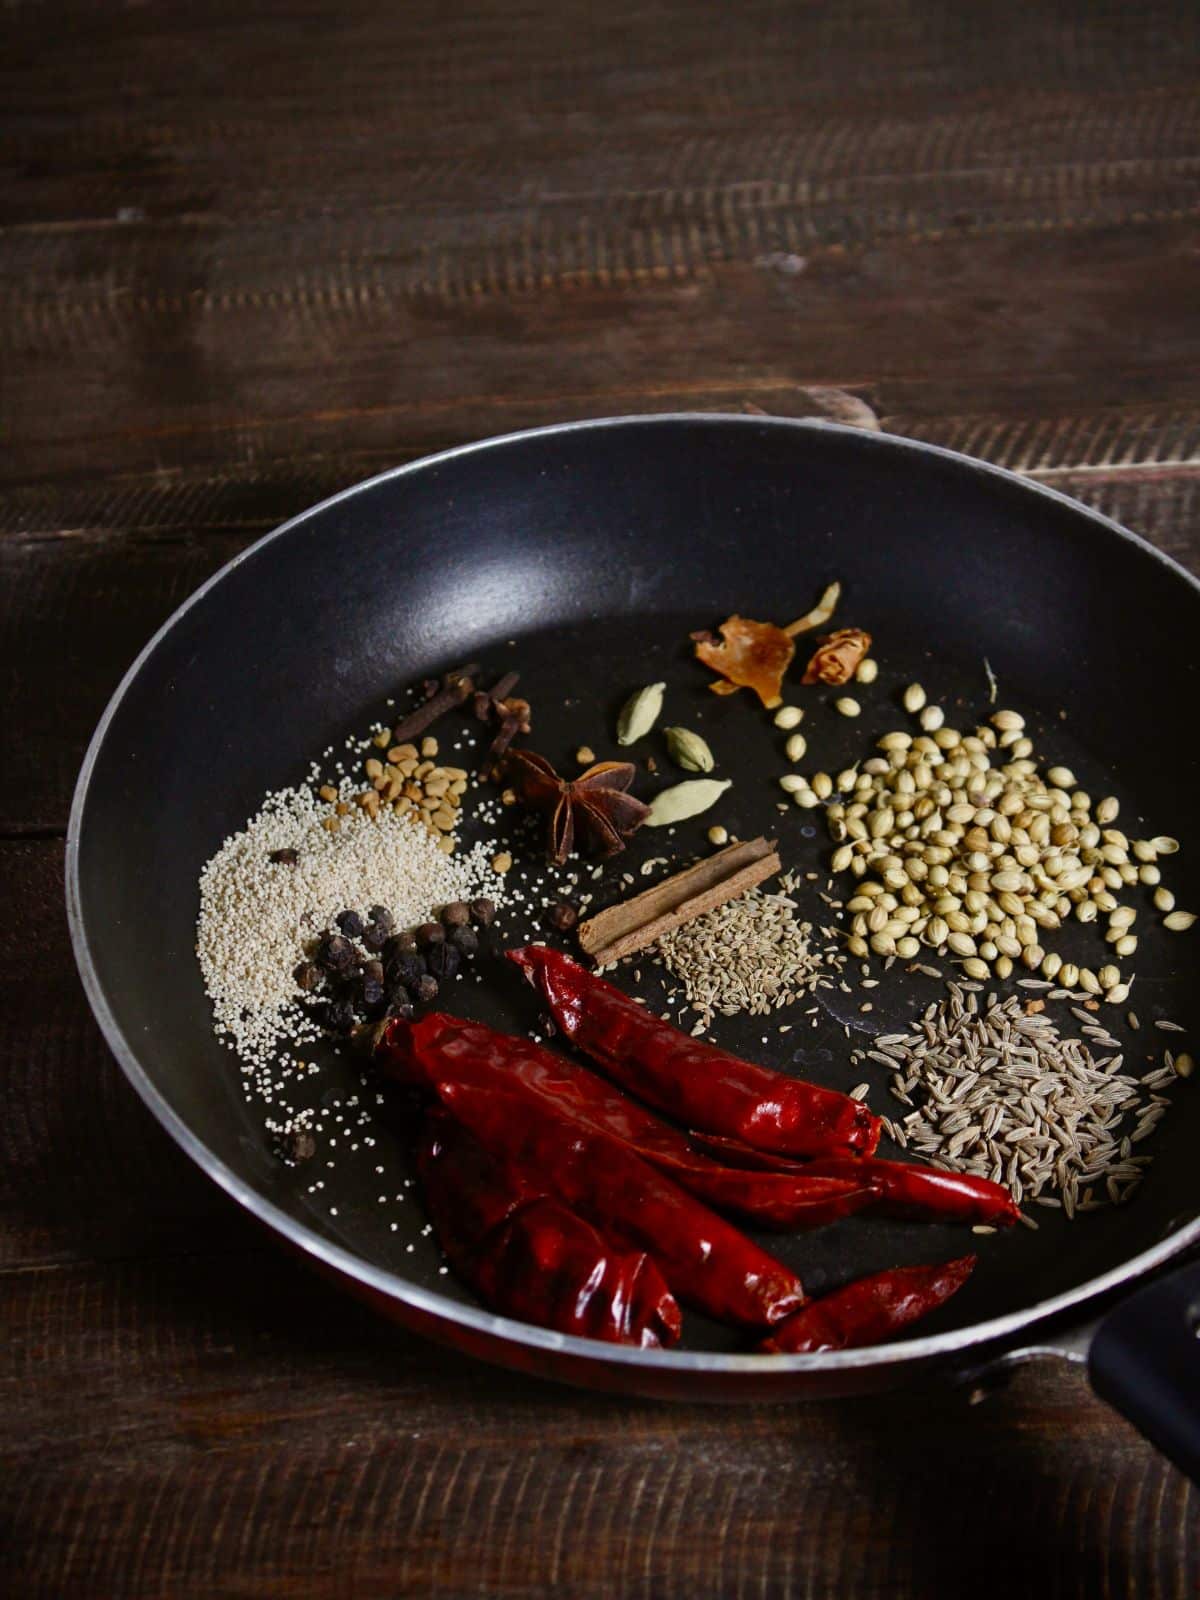 Add all the ingredients of chettinad  masala in a pan and saute 